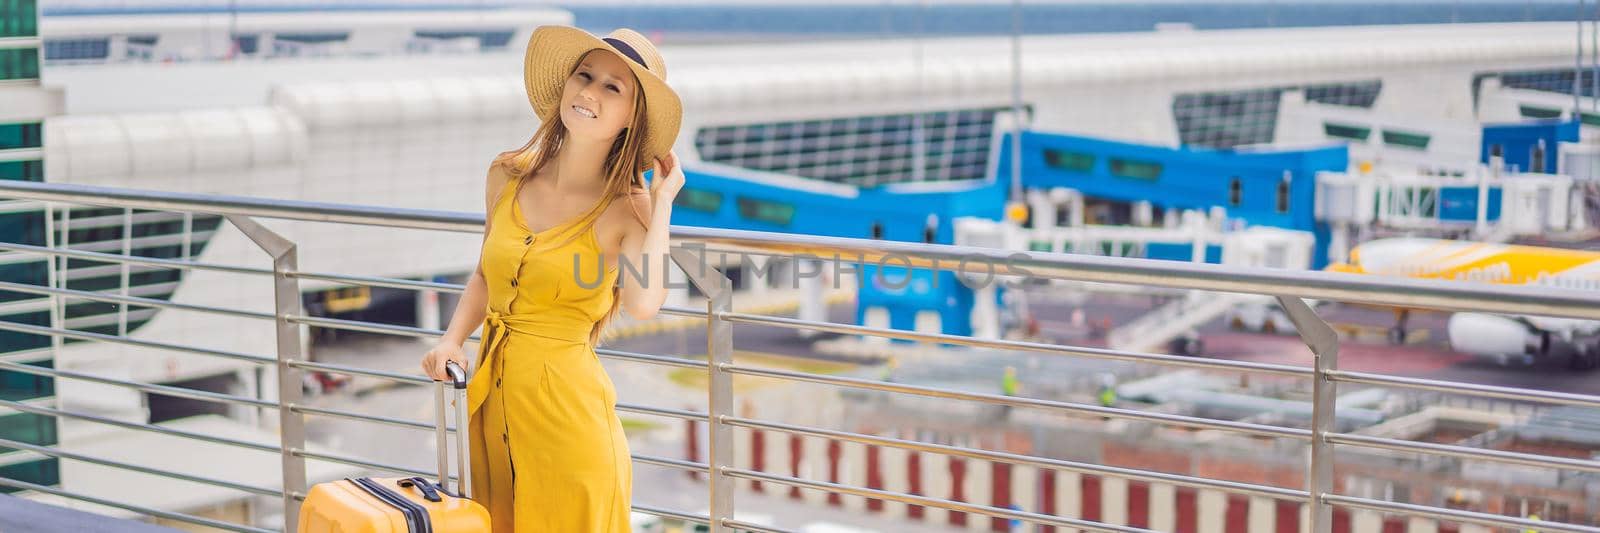 Start of her journey. Beautiful young woman ltraveler in a yellow dress and a yellow suitcase is waiting for her flight. BANNER, LONG FORMAT